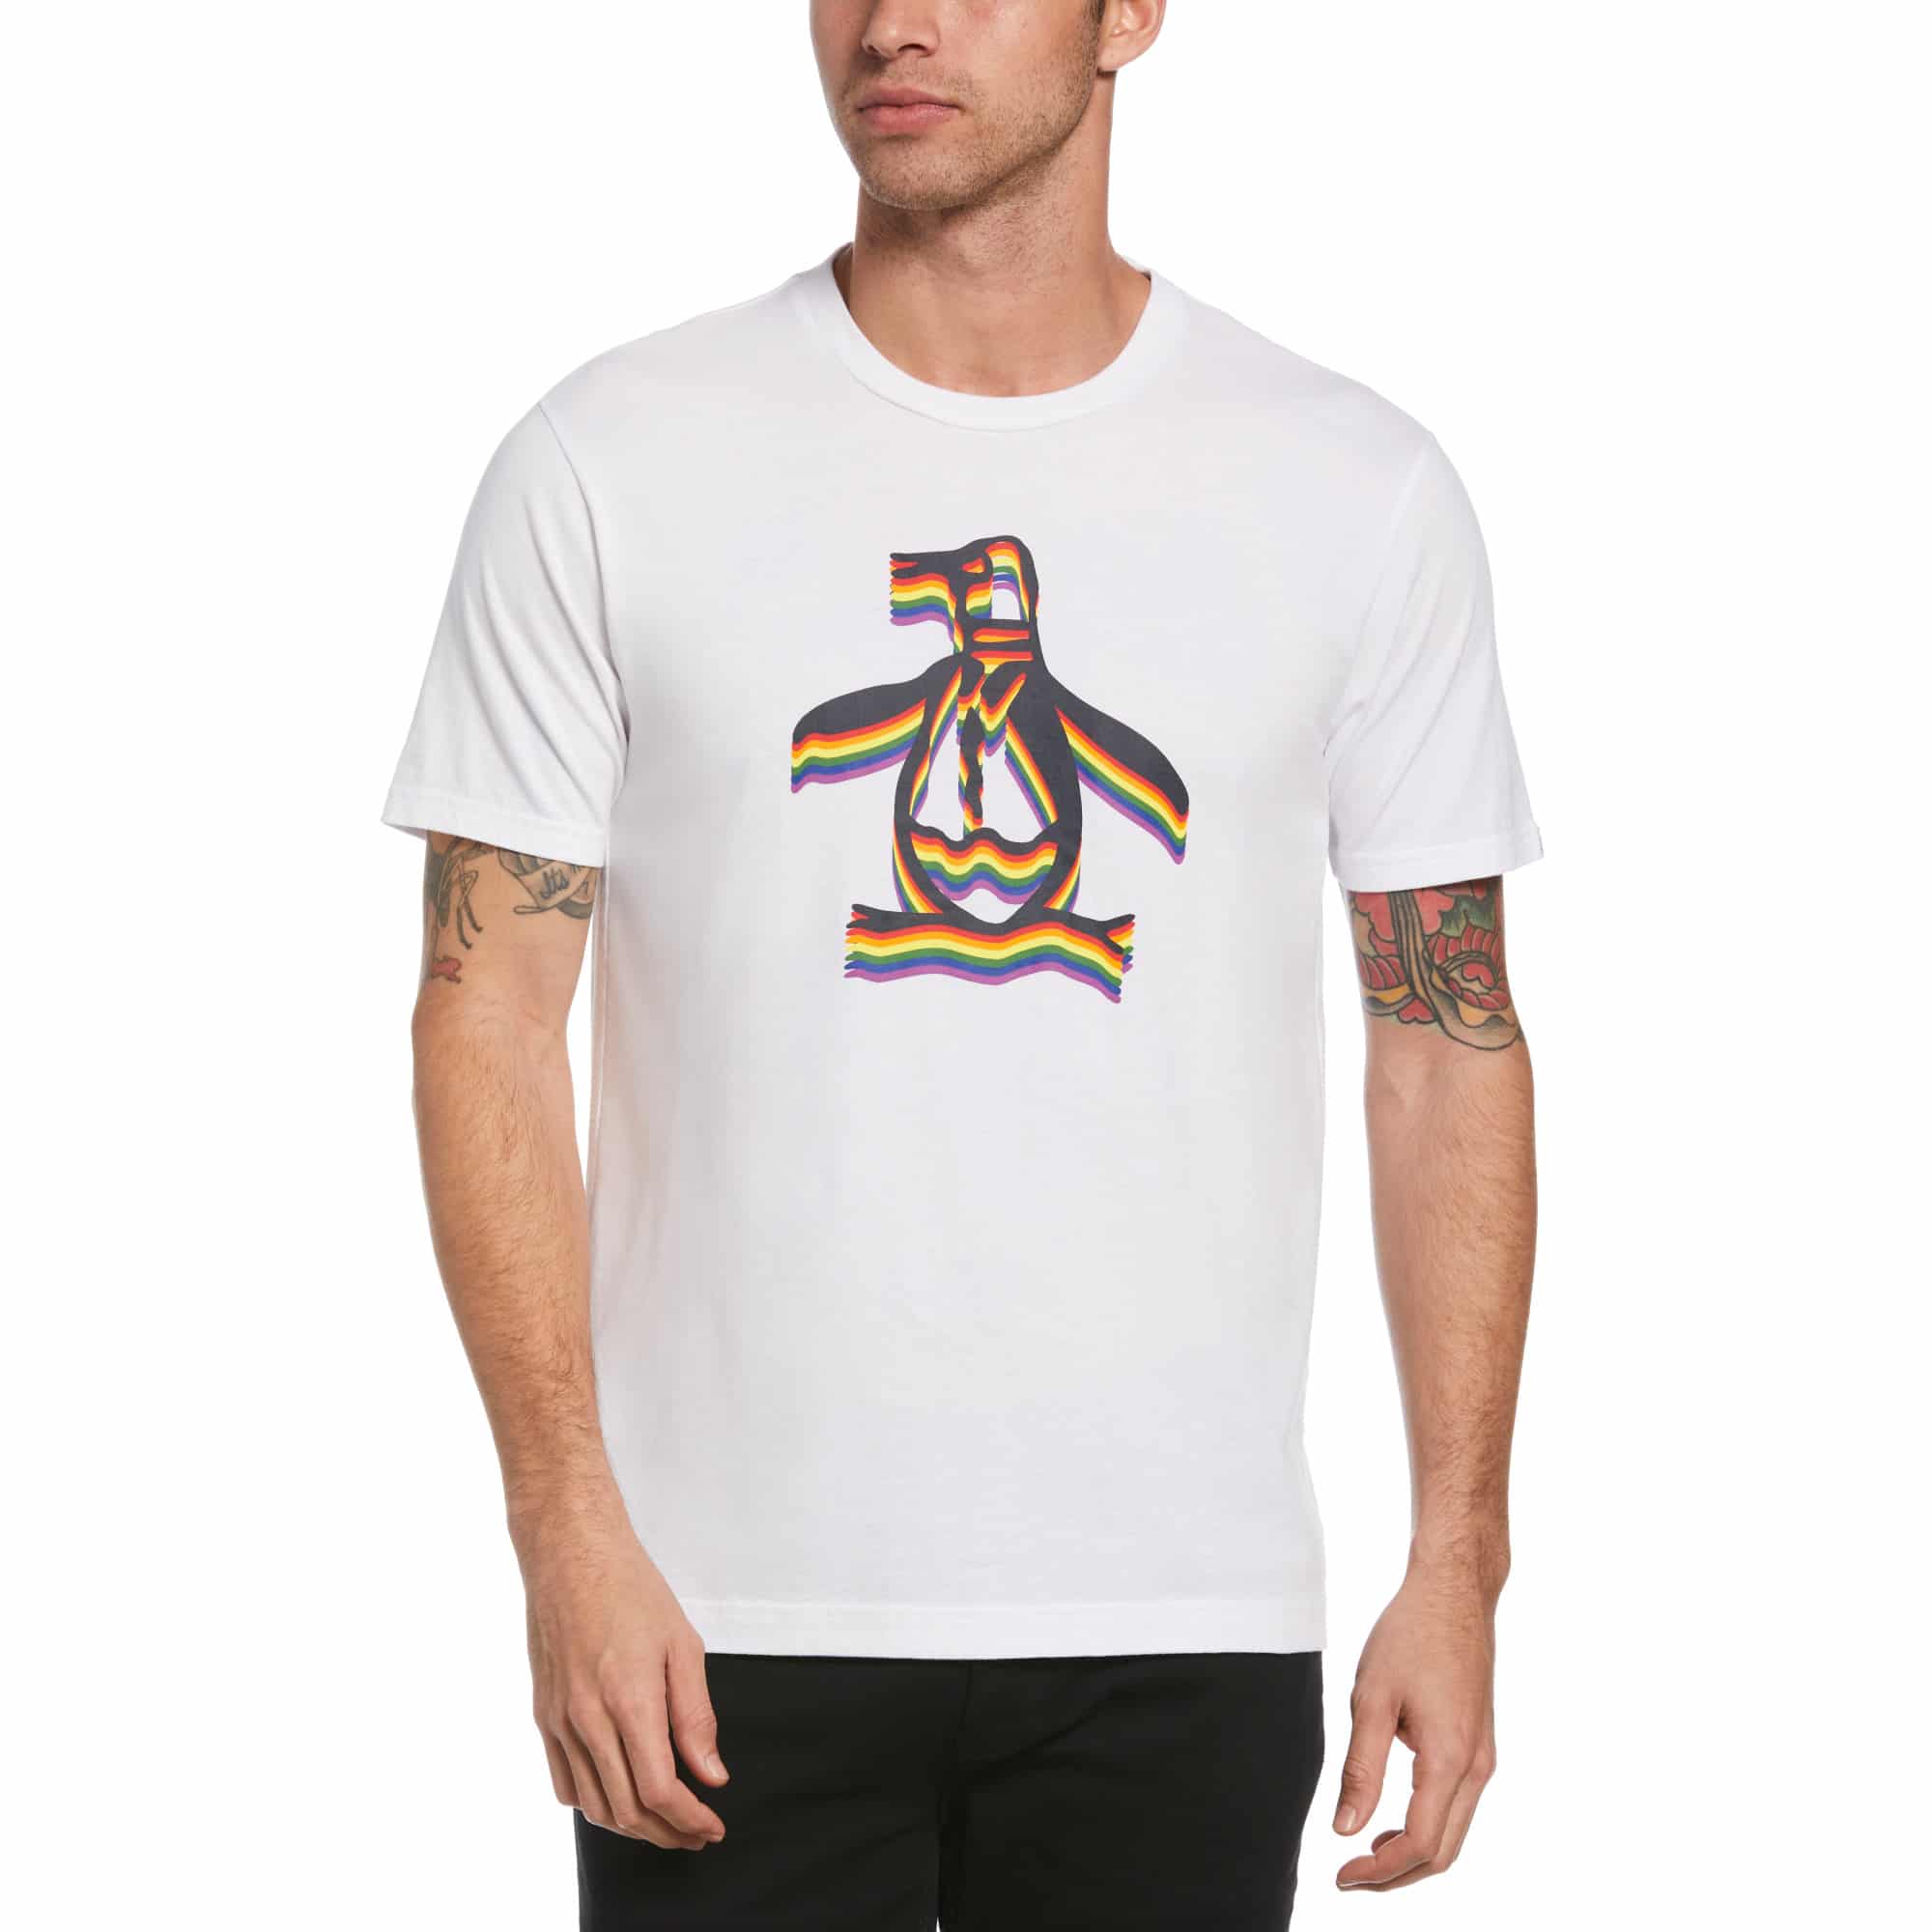 Penguin is donating 100 percent of proceeds from sales of the Rainbow Pete Pride Tee to All Out.